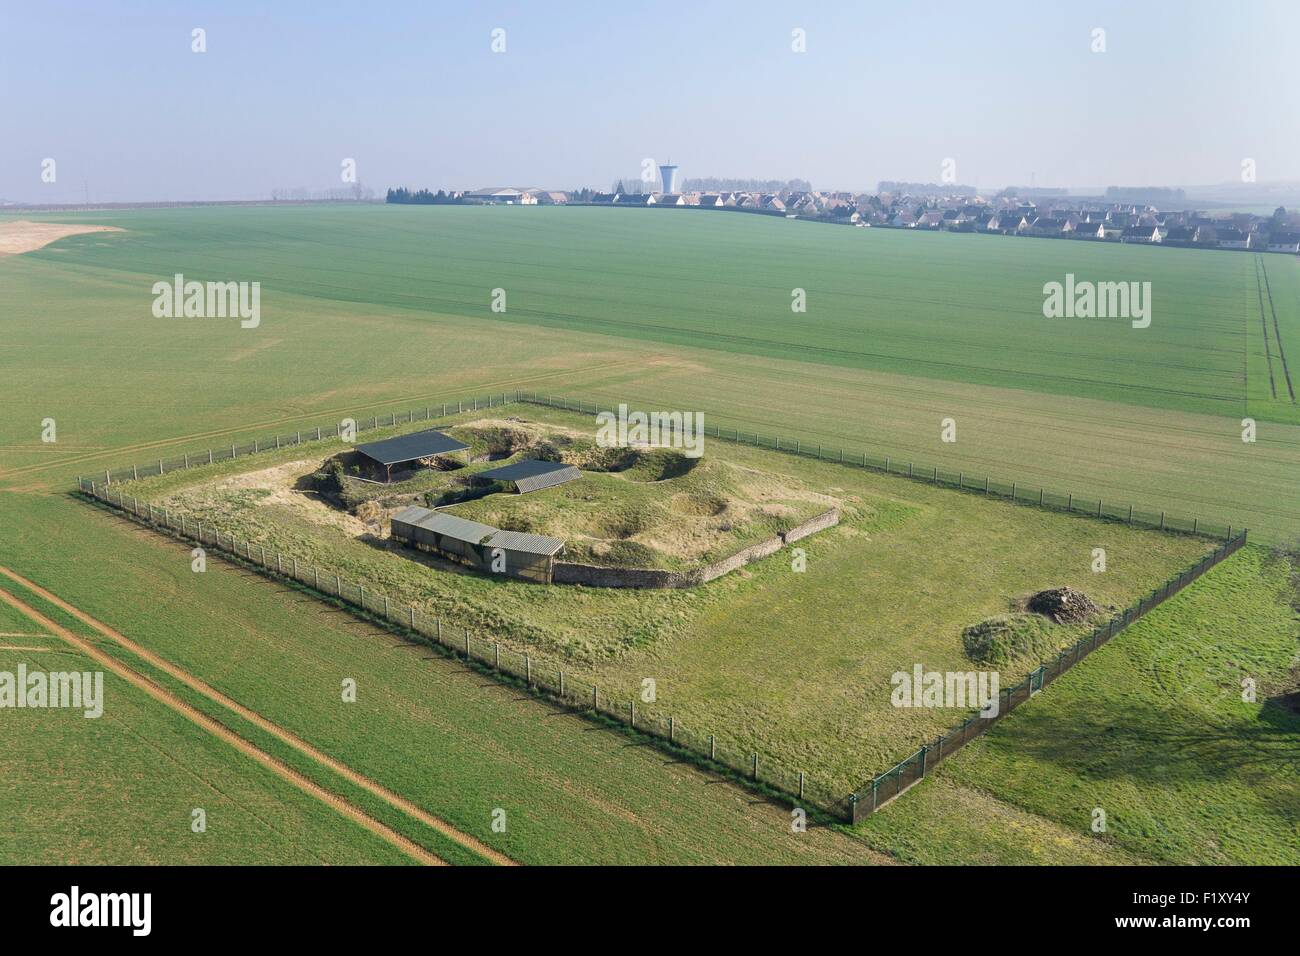 France, Calvados, Fontenay le Marmion, Tumulus de la Hogue, Neolithic mound sheltering twelve funerary chambers (aerial view) Stock Photo